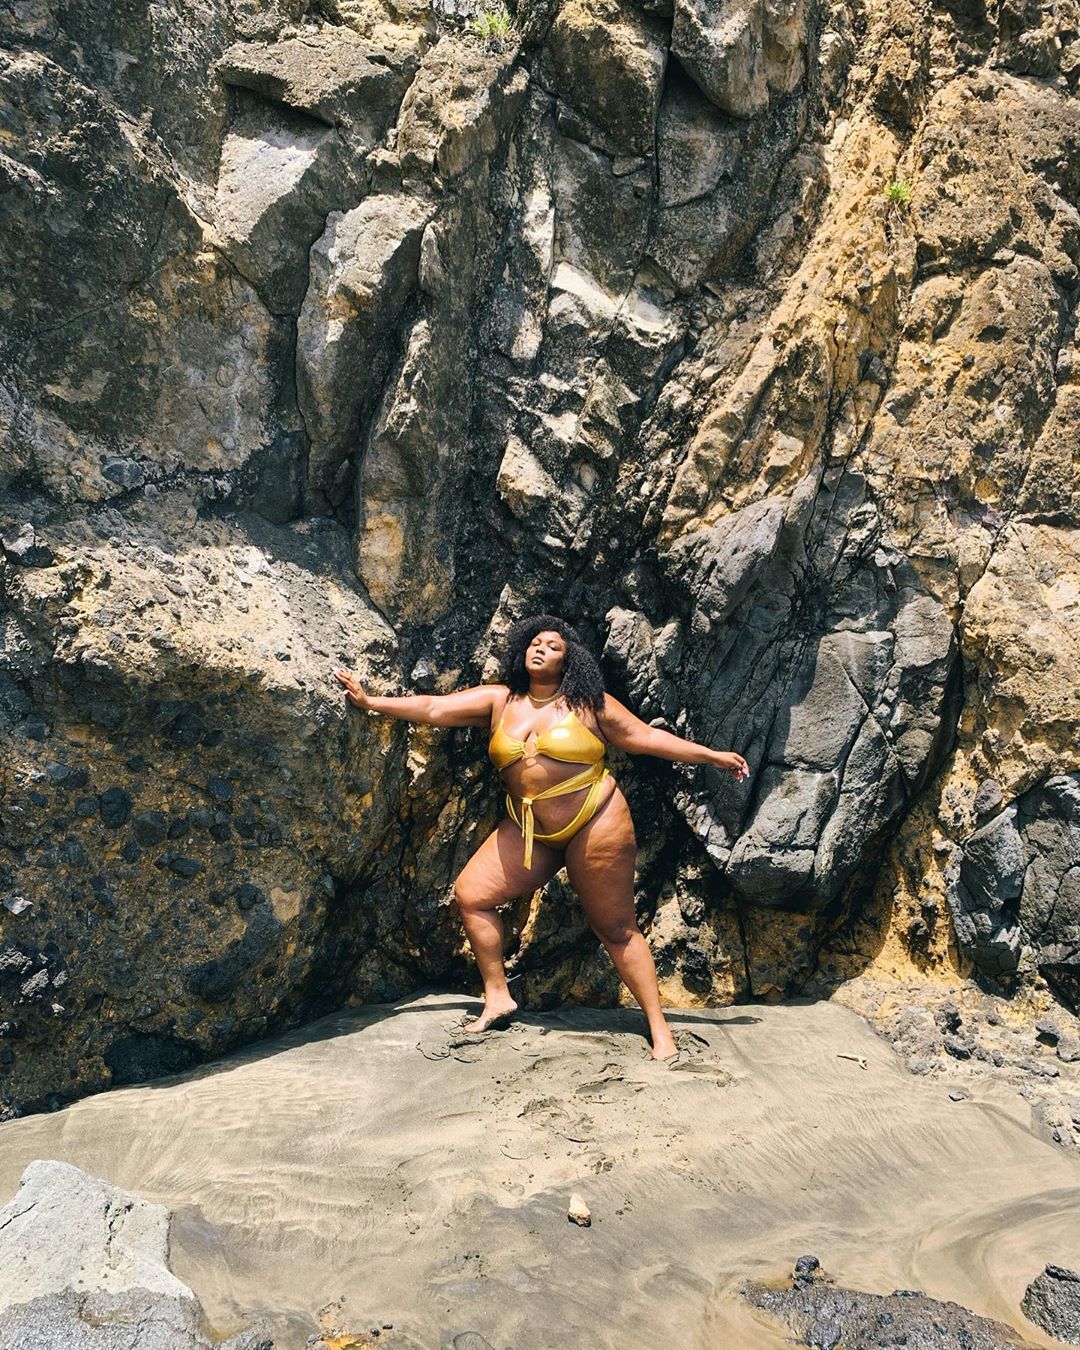 TikTok Restores Swimsuit Video Of Lizzo After She Accuses The App Of Taking It Down